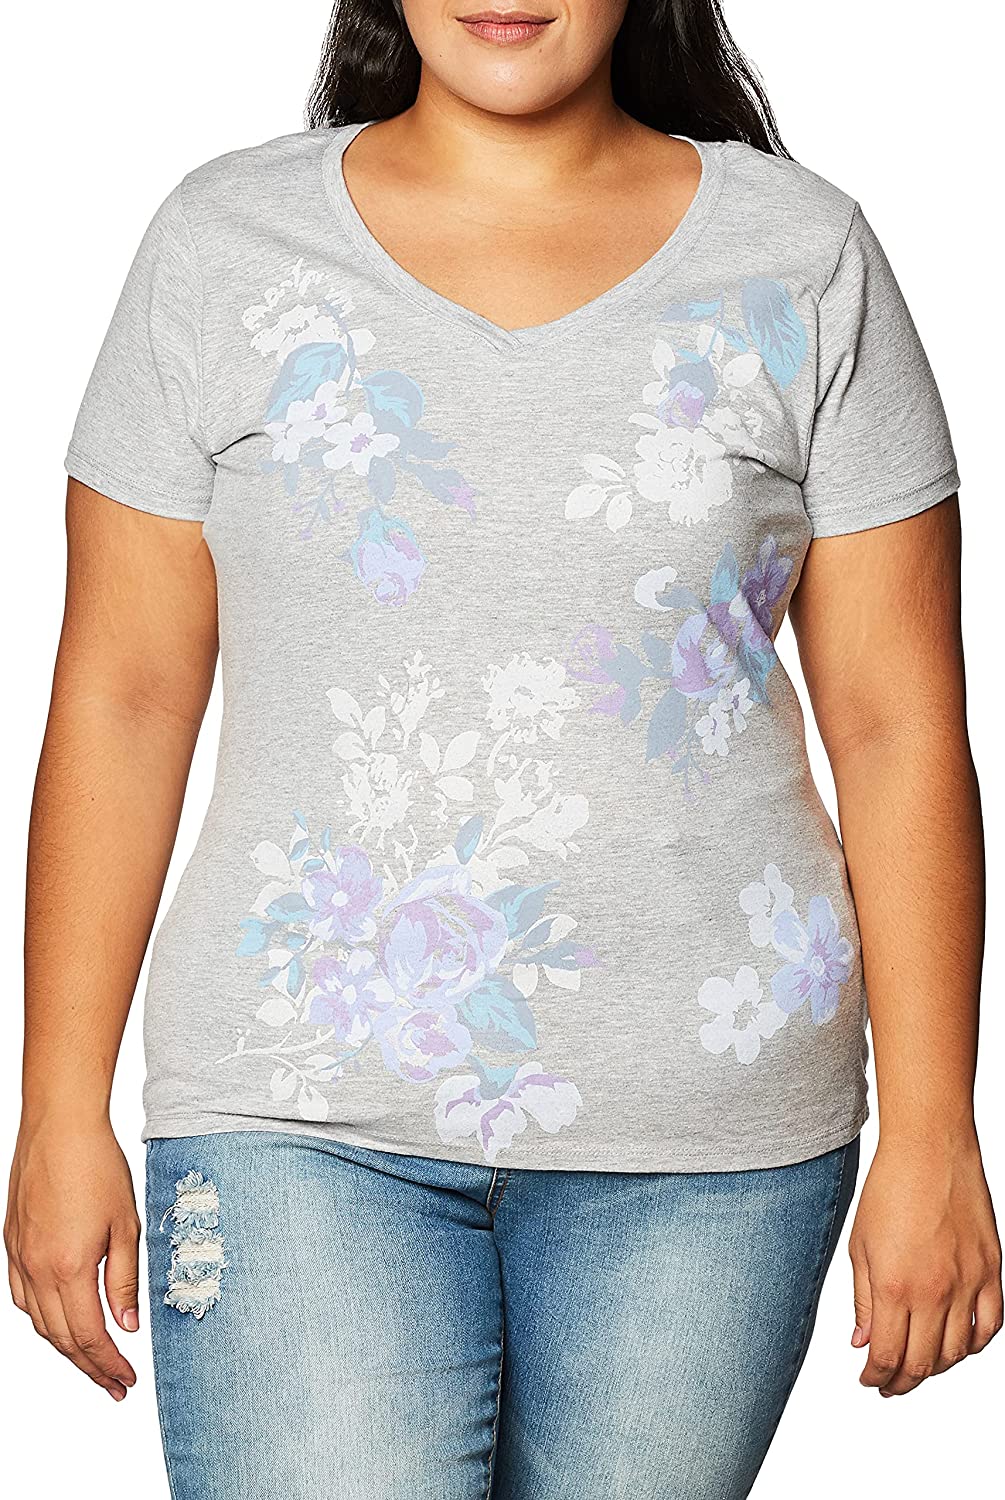 multiple graphics available Hanes Women’s Short Sleeve Graphic V-neck Tee